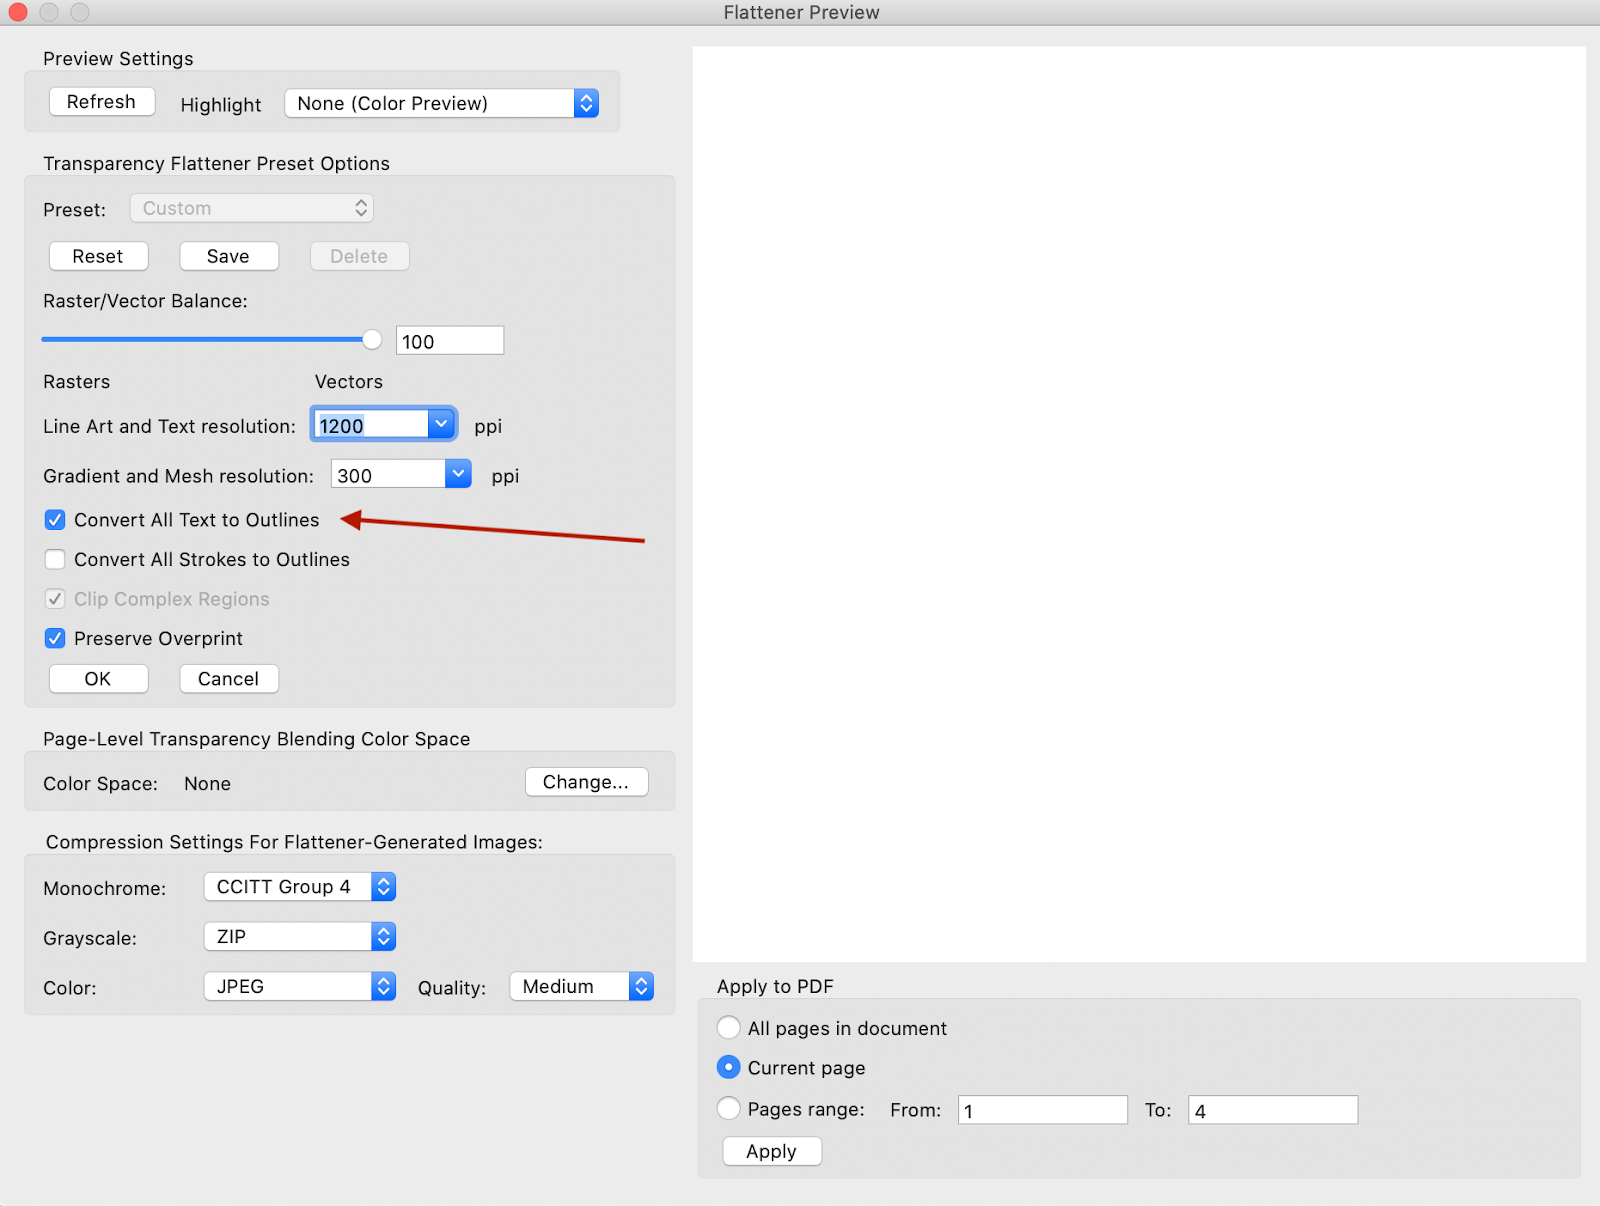 Screenshot of the flattening preview of Adobe. Click "Convert All Text to Outlines"